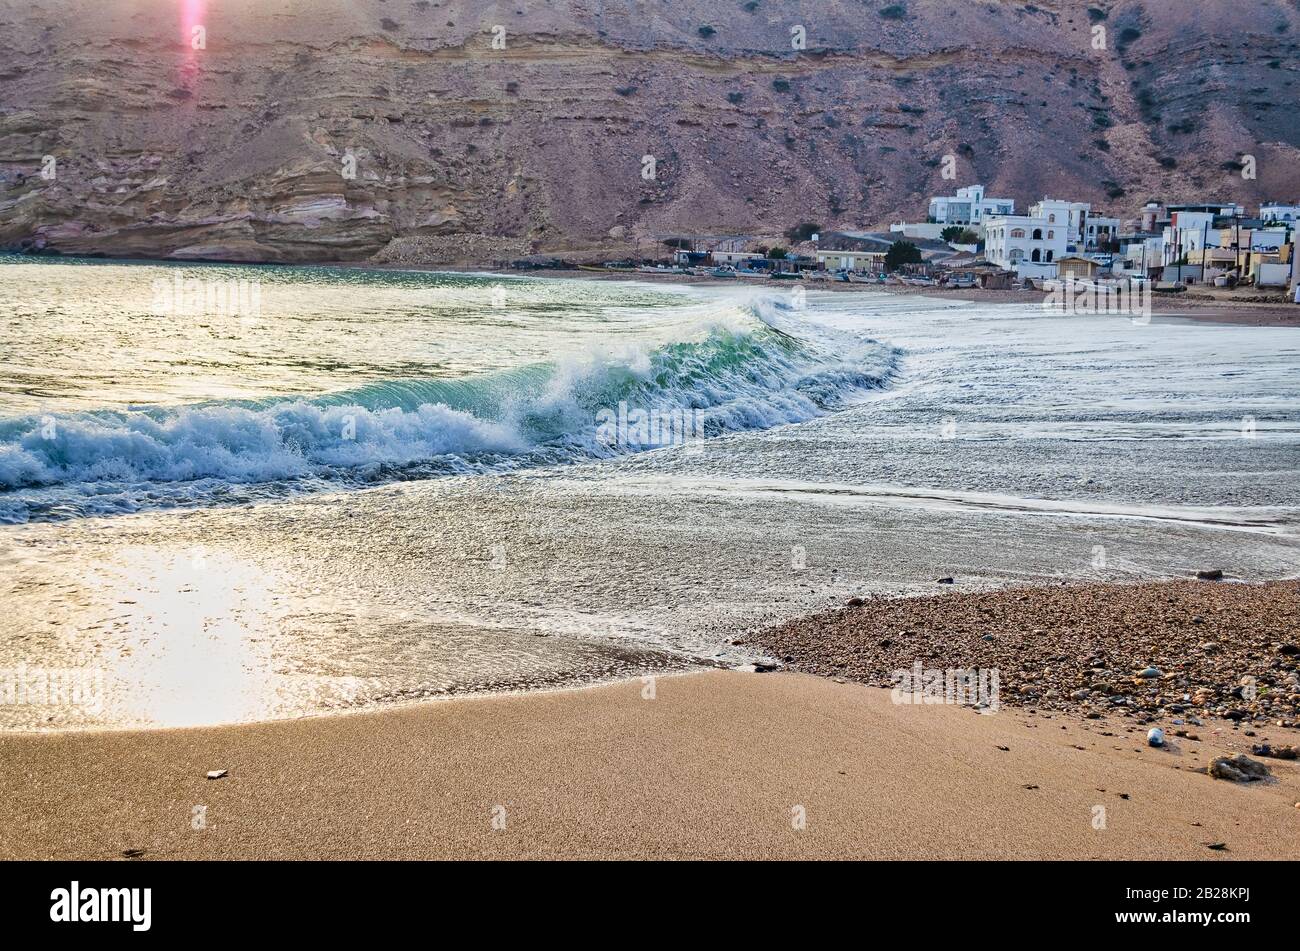 Waves splashing on the beach near a small town on the valley of mountains, in the morning. From Muscat, Oman. Stock Photo